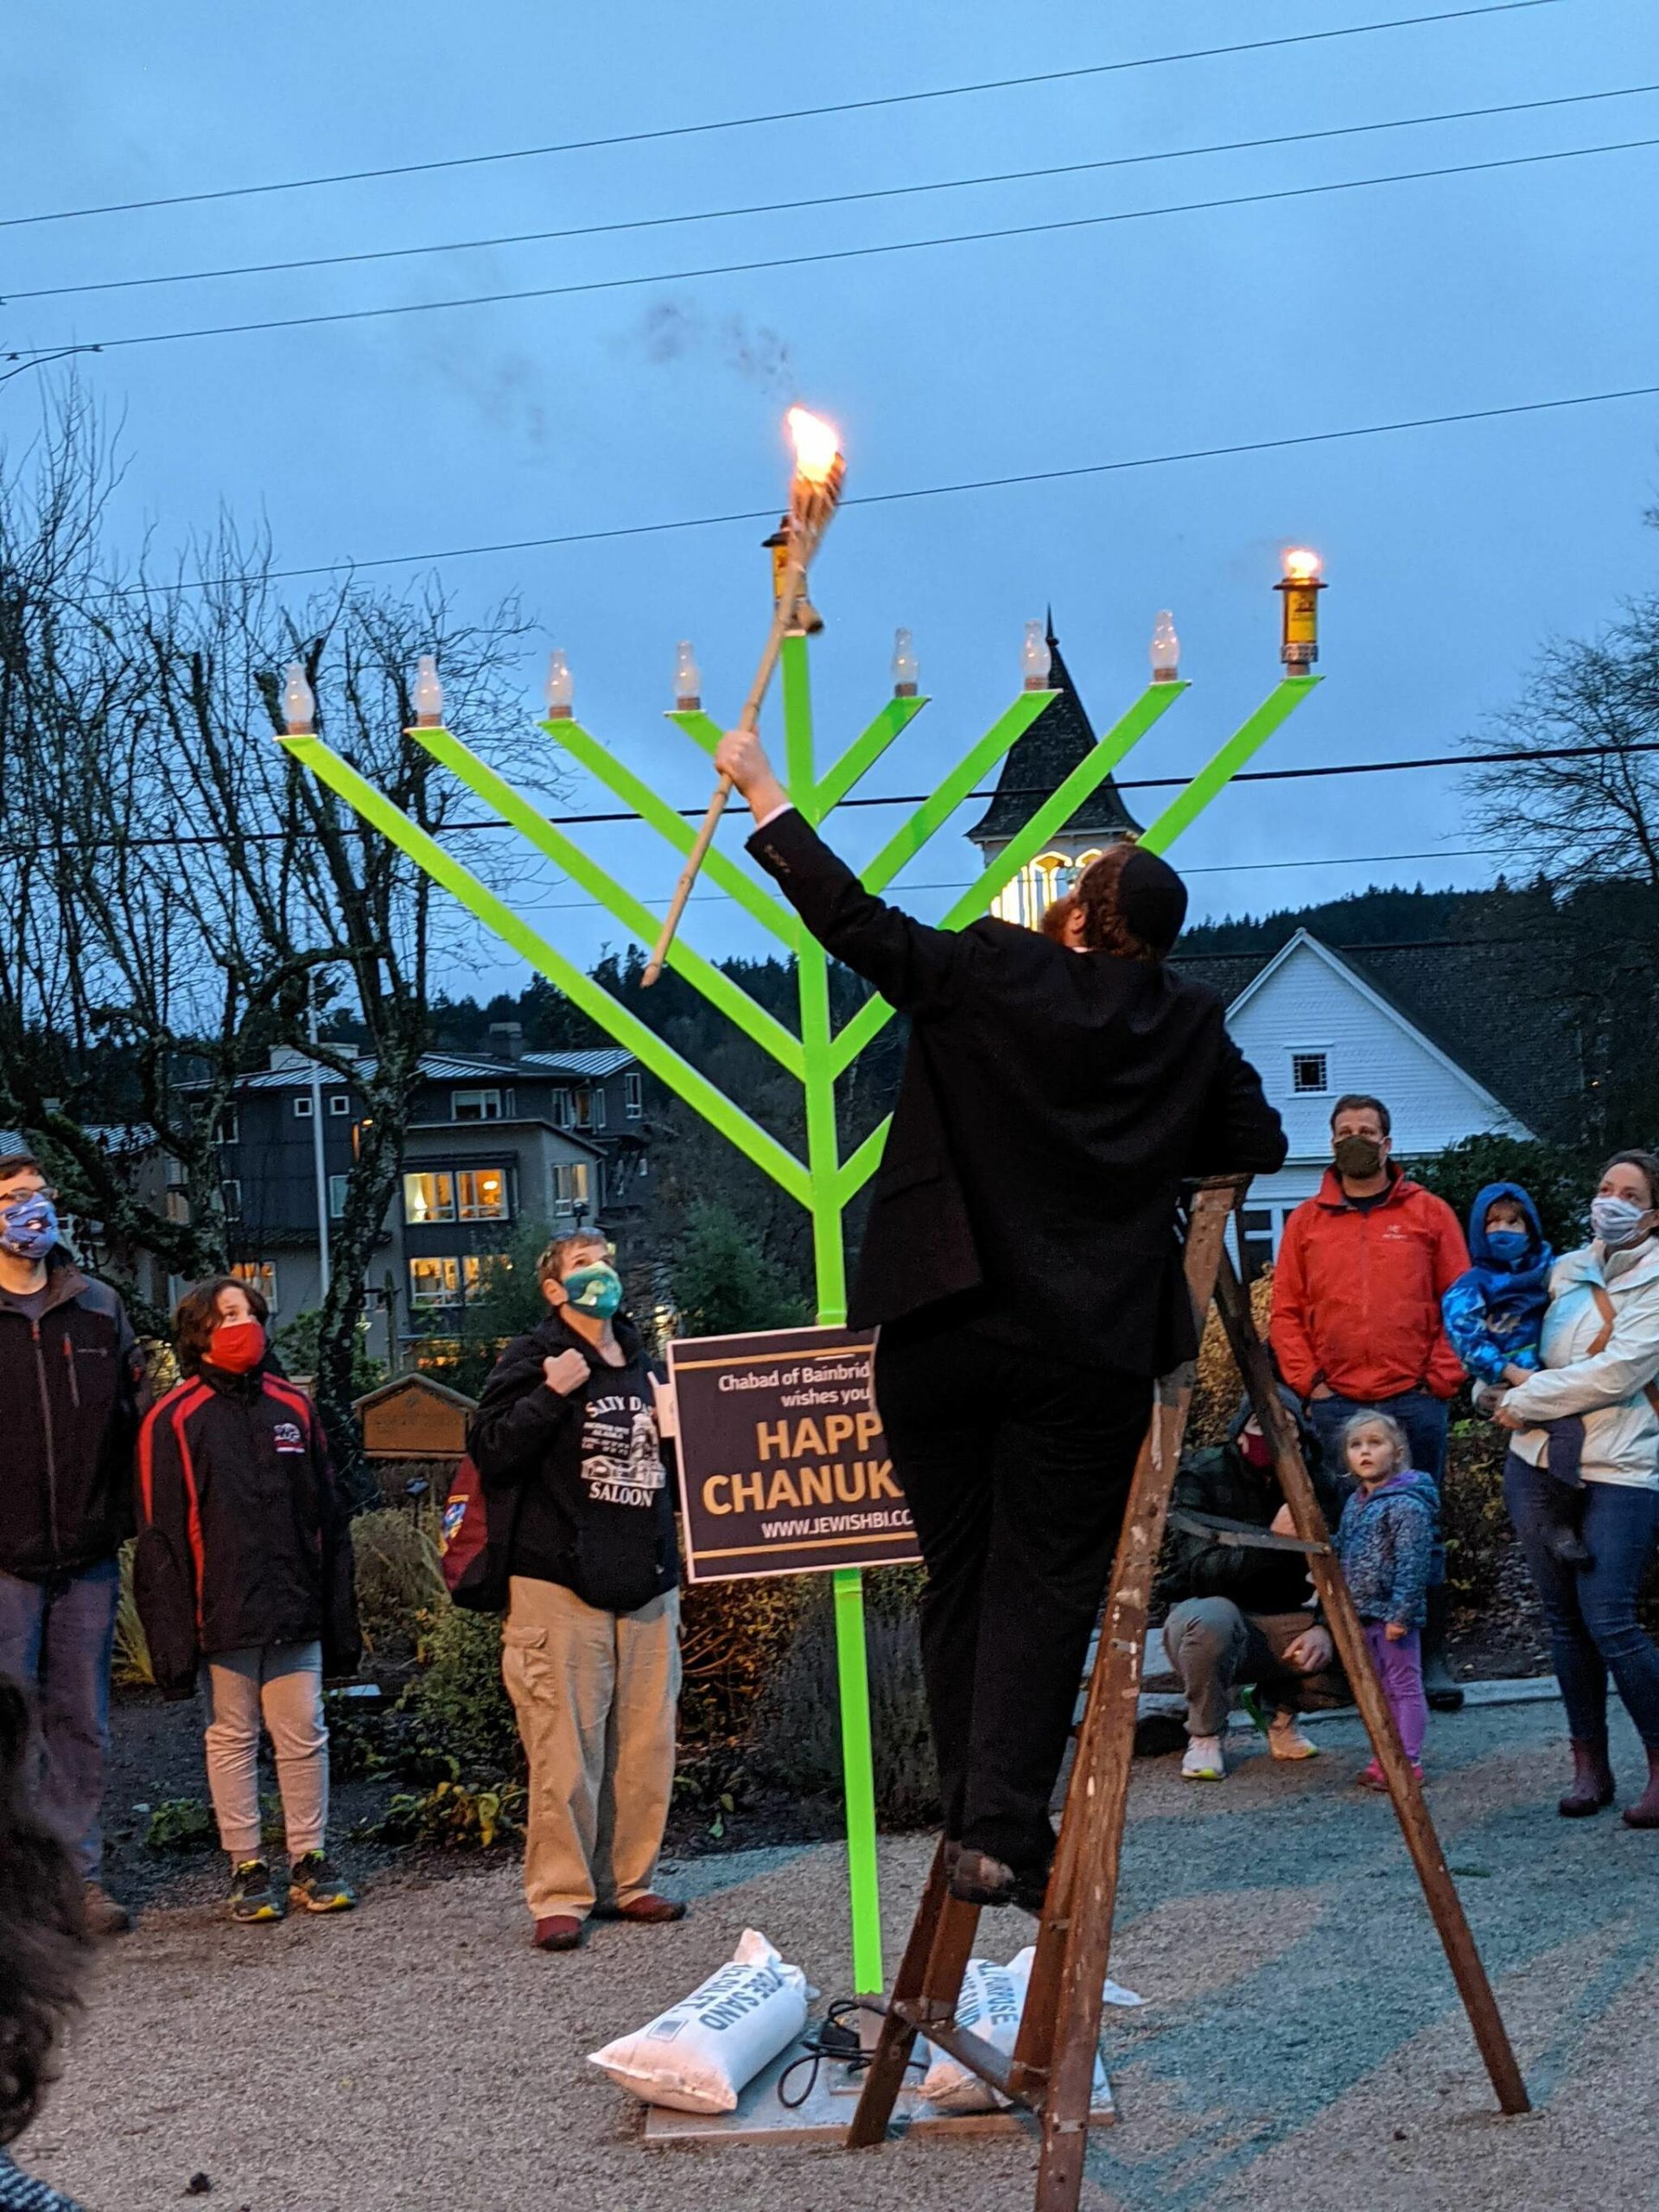 Rabbi Mendi Goldshmid, co-director of the Chabad Jewish Center of Bainbridge Island & North Kitsap, lit the first candle of the community Menorah in observance of the first night of Hanukkah.